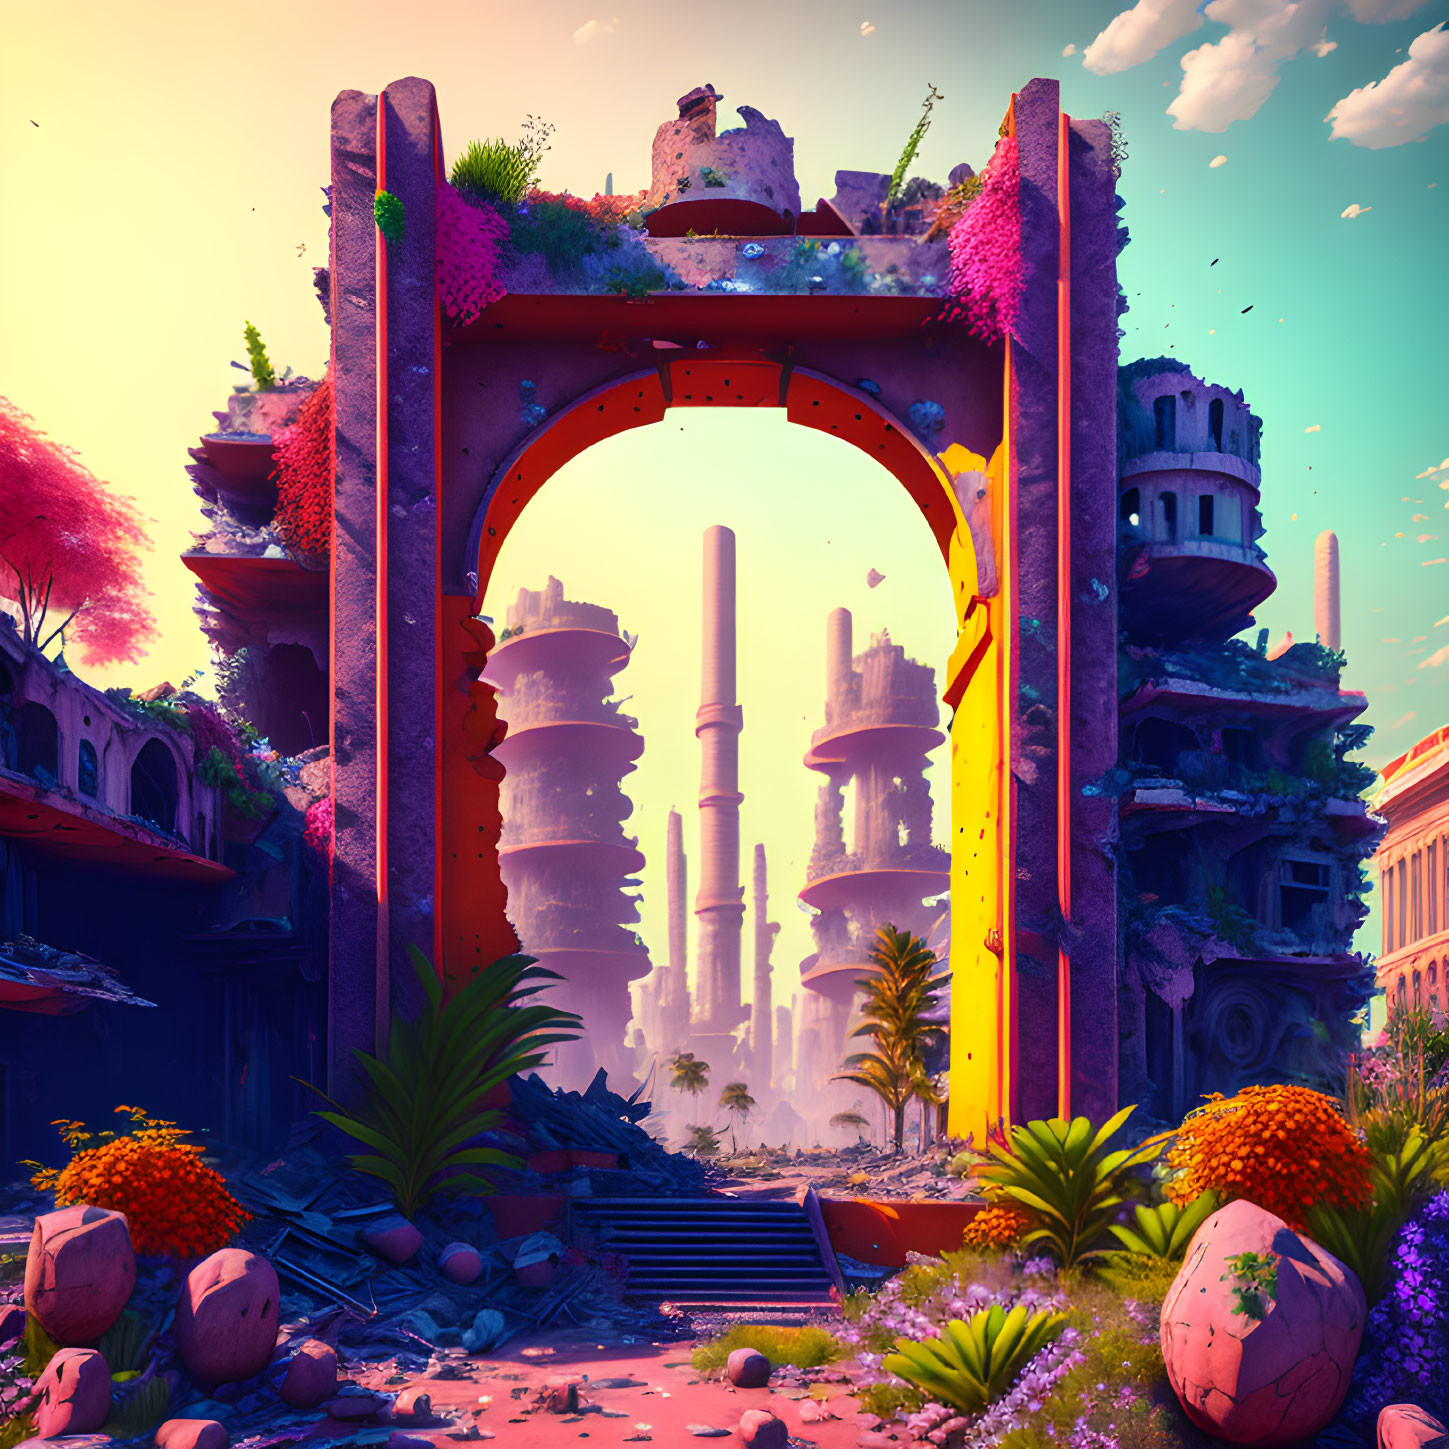 Futuristic ruin with overgrown flora and ancient archways